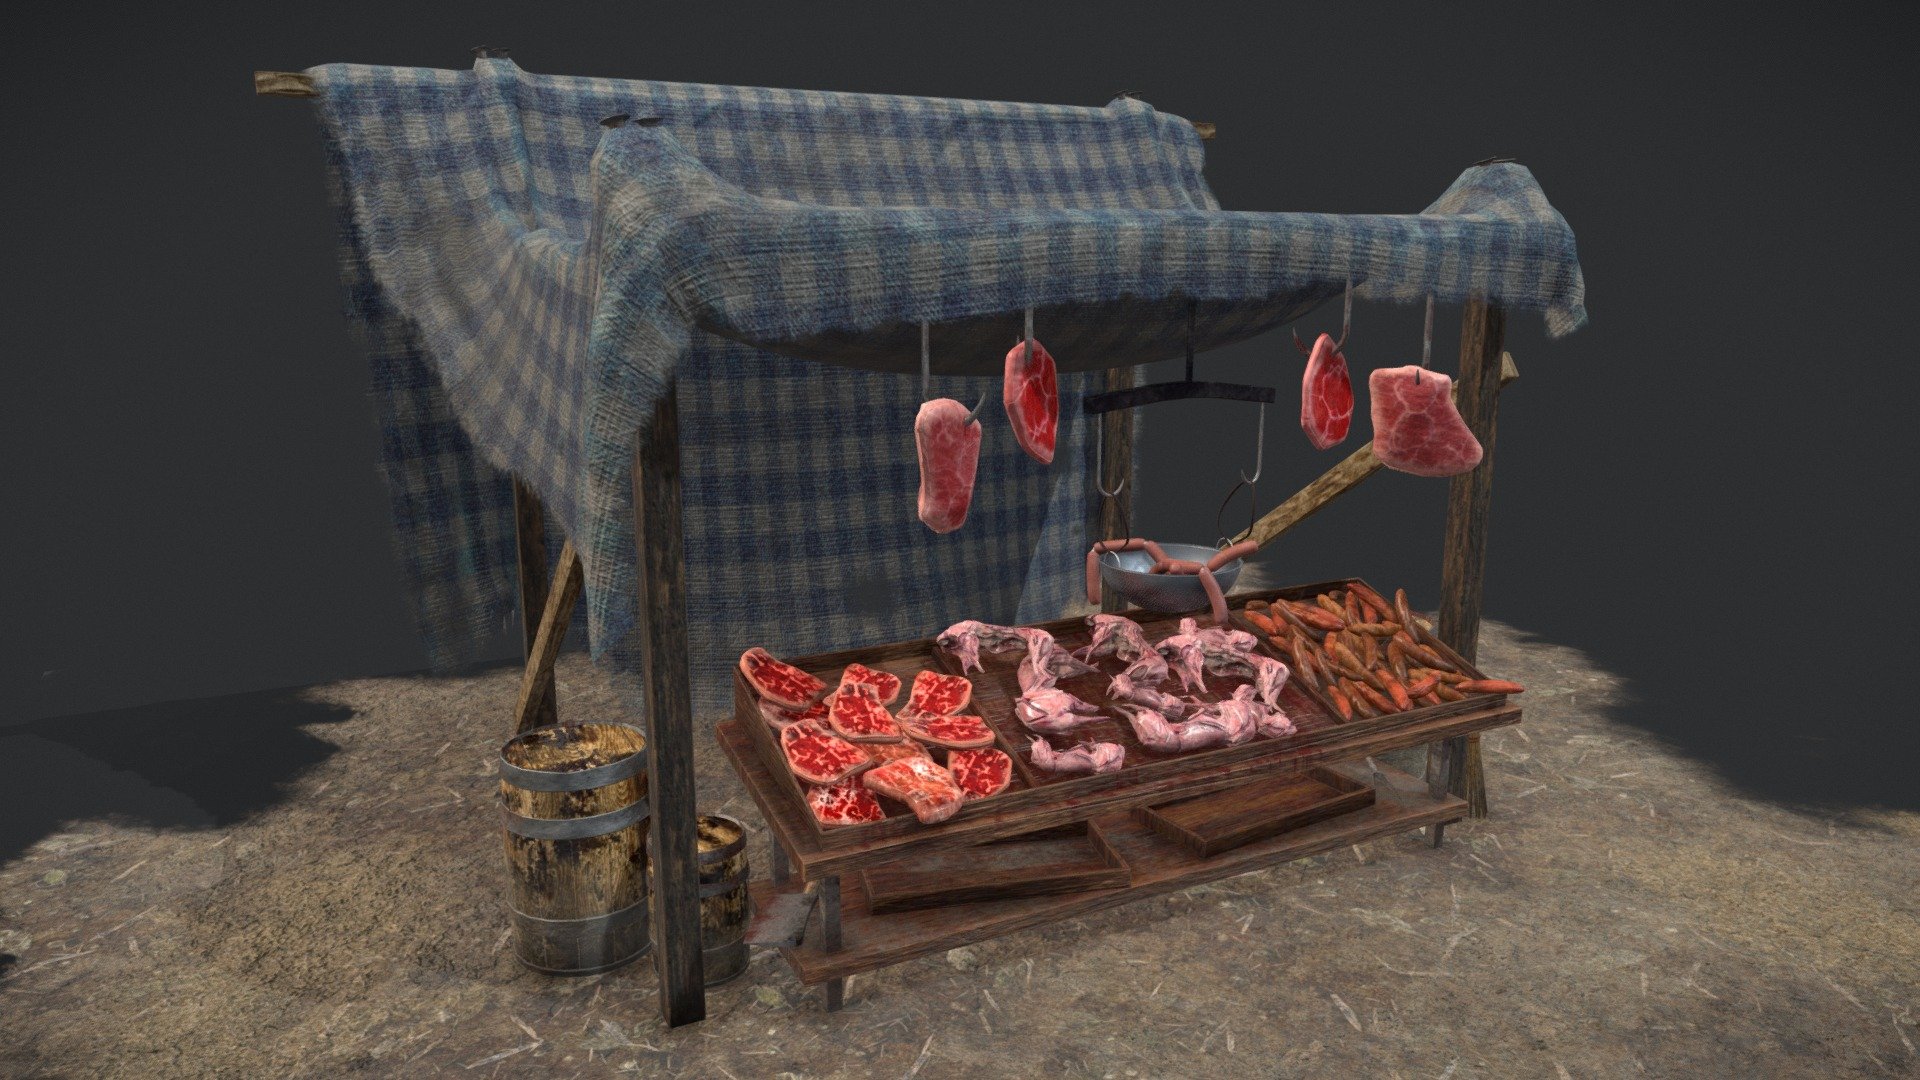 Medieval Style Meat Stall 3D Model PBR Texture available in 4096 x 4096 Maps include : Basecolor, Normal, Roughness, and Metallic. Model contains 13 Materials / Textures. One Model File 3d model